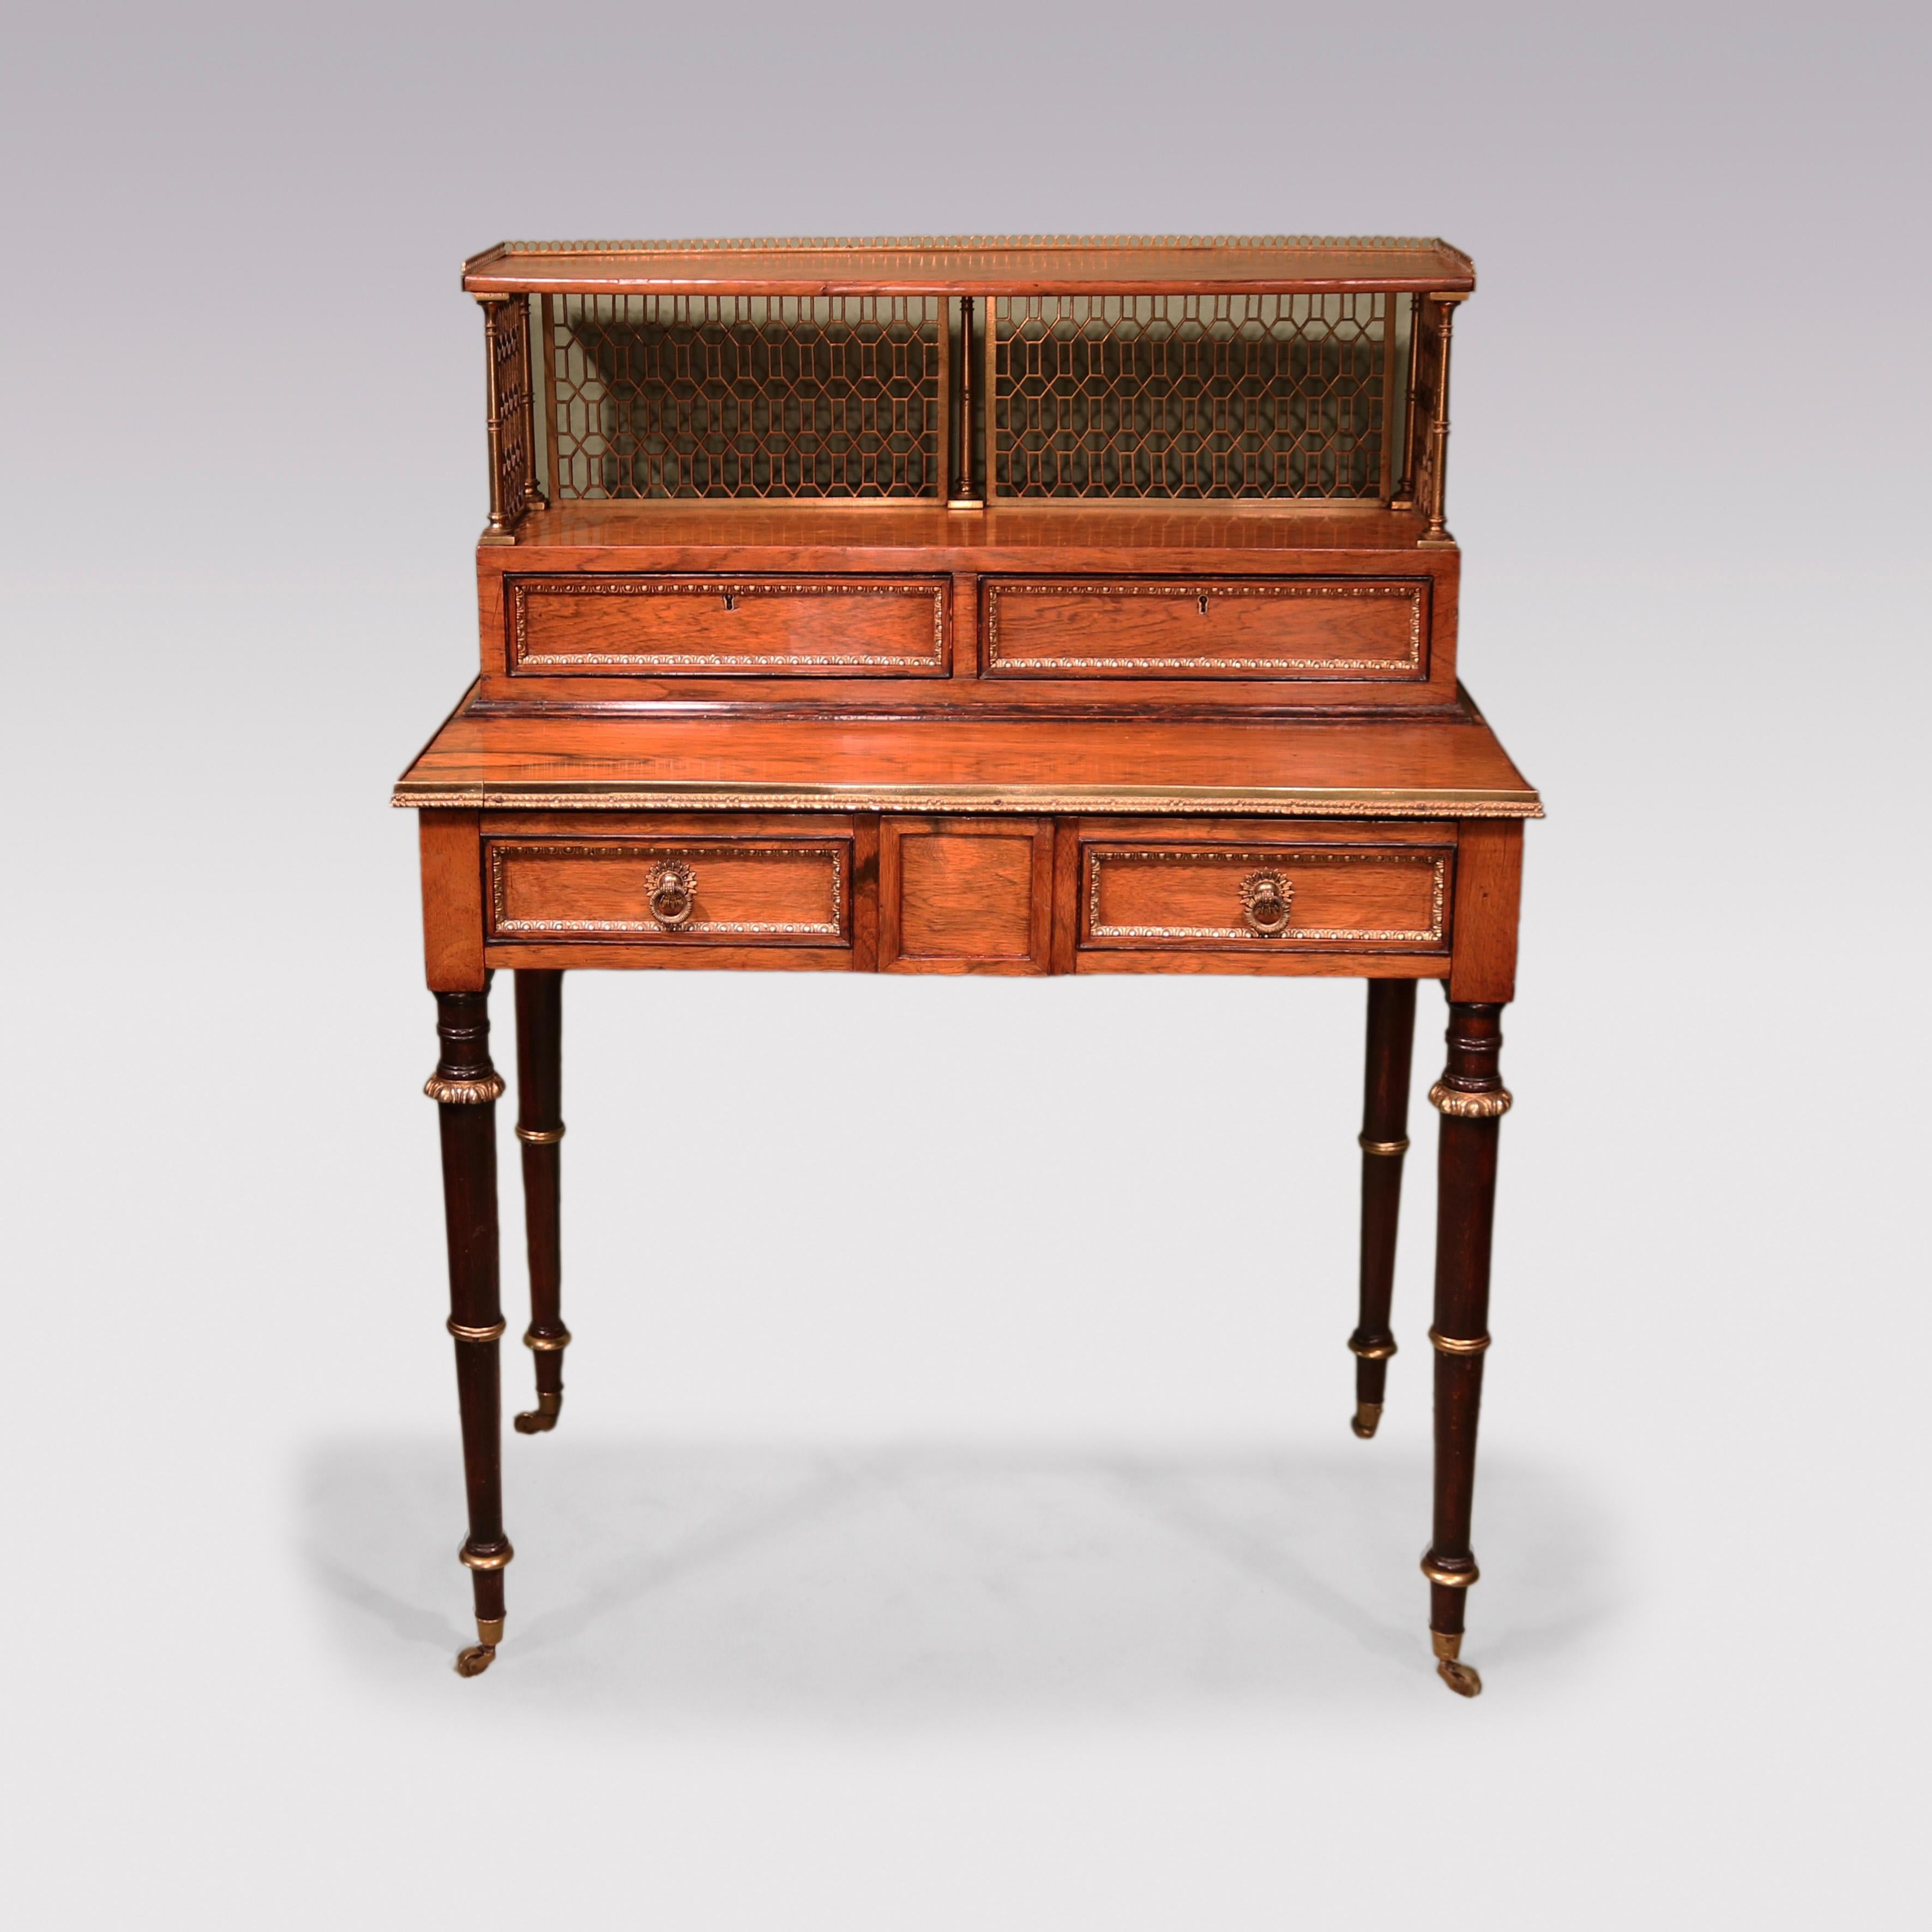 An early 19th century Regency period Rosewood Bonheur du Jour in the style of John McLean having distinctive gilt brass fretwork upper part with two small drawers above brass edged lower section with panelled and brass framed drawer, supported on